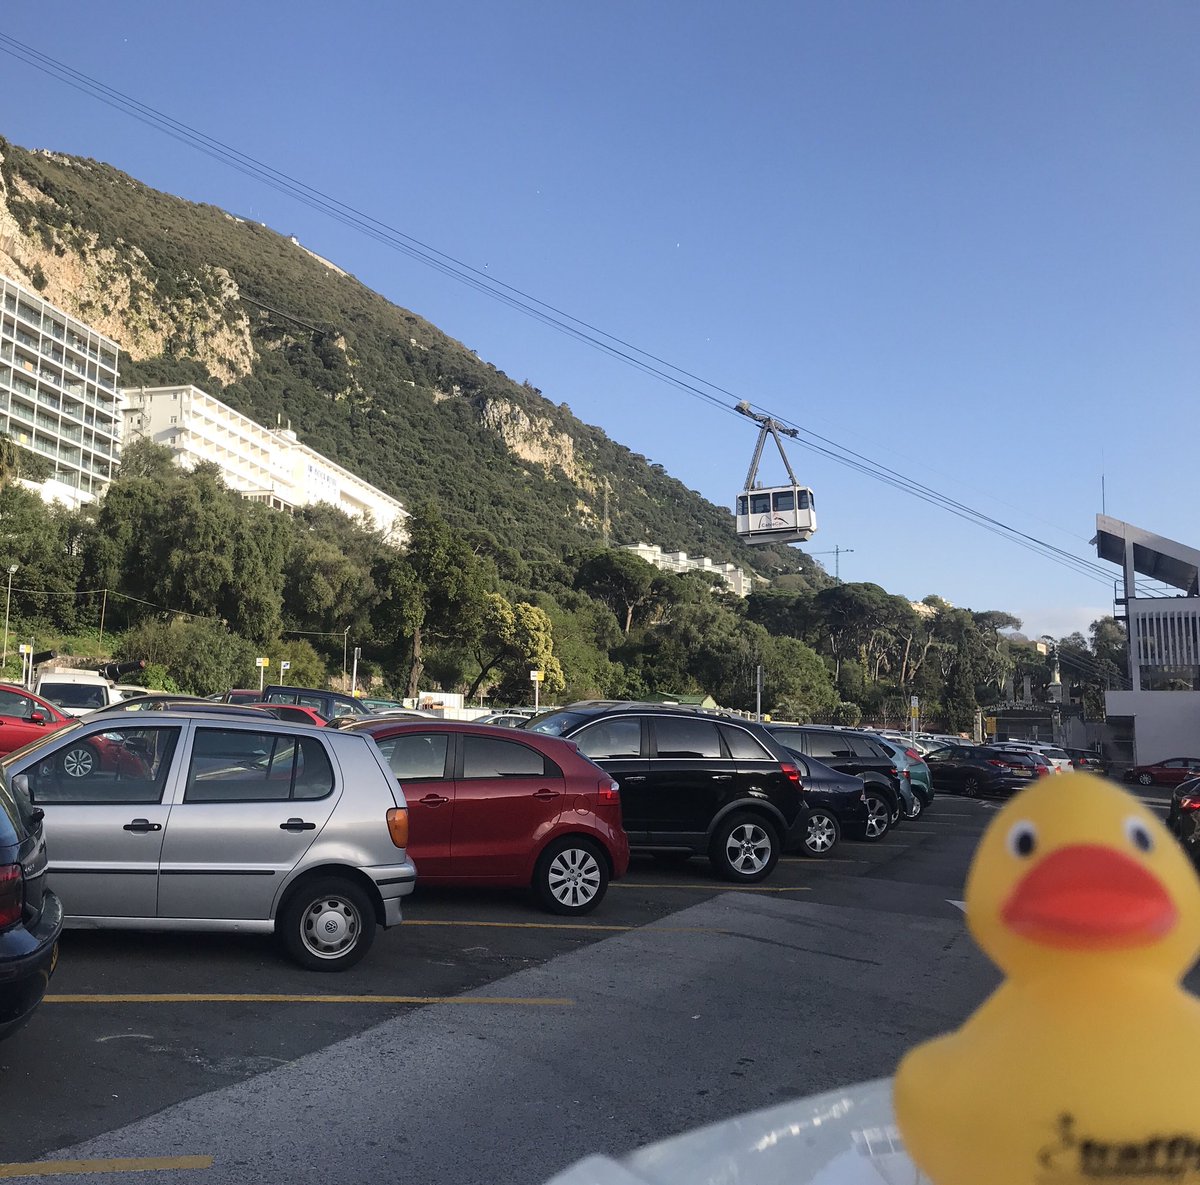 ... and then maybe a trip up the #rock in the @CableCarGib @MHBland @VisitTheRock #ducktravels #cablecar #followme @walkwithmegib #adventures #gibraltar #instagram